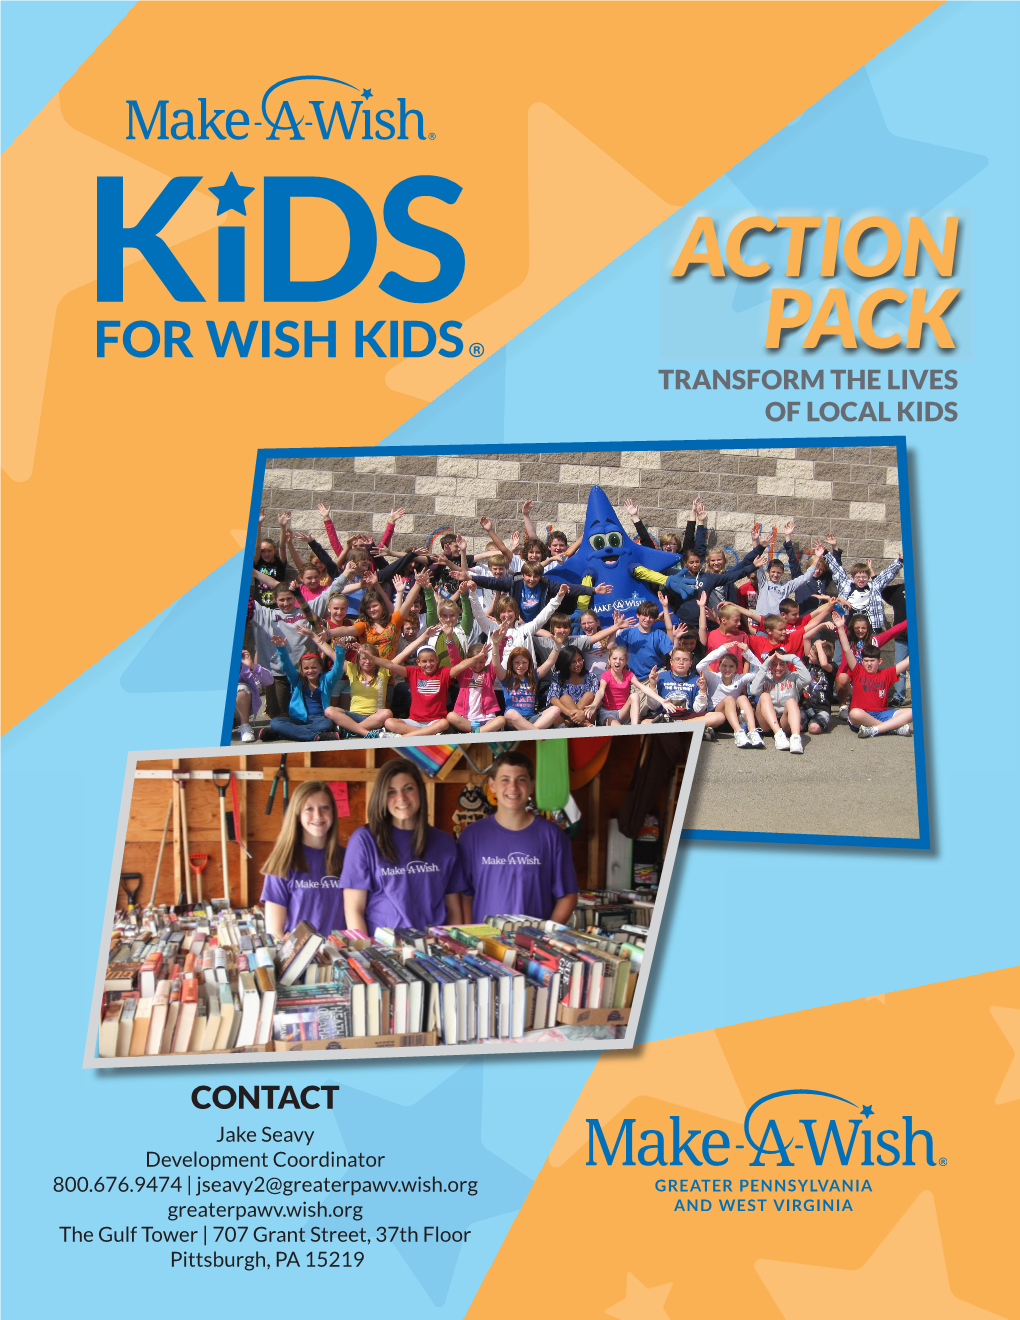 Action Pack Transform the Lives of Local Kids